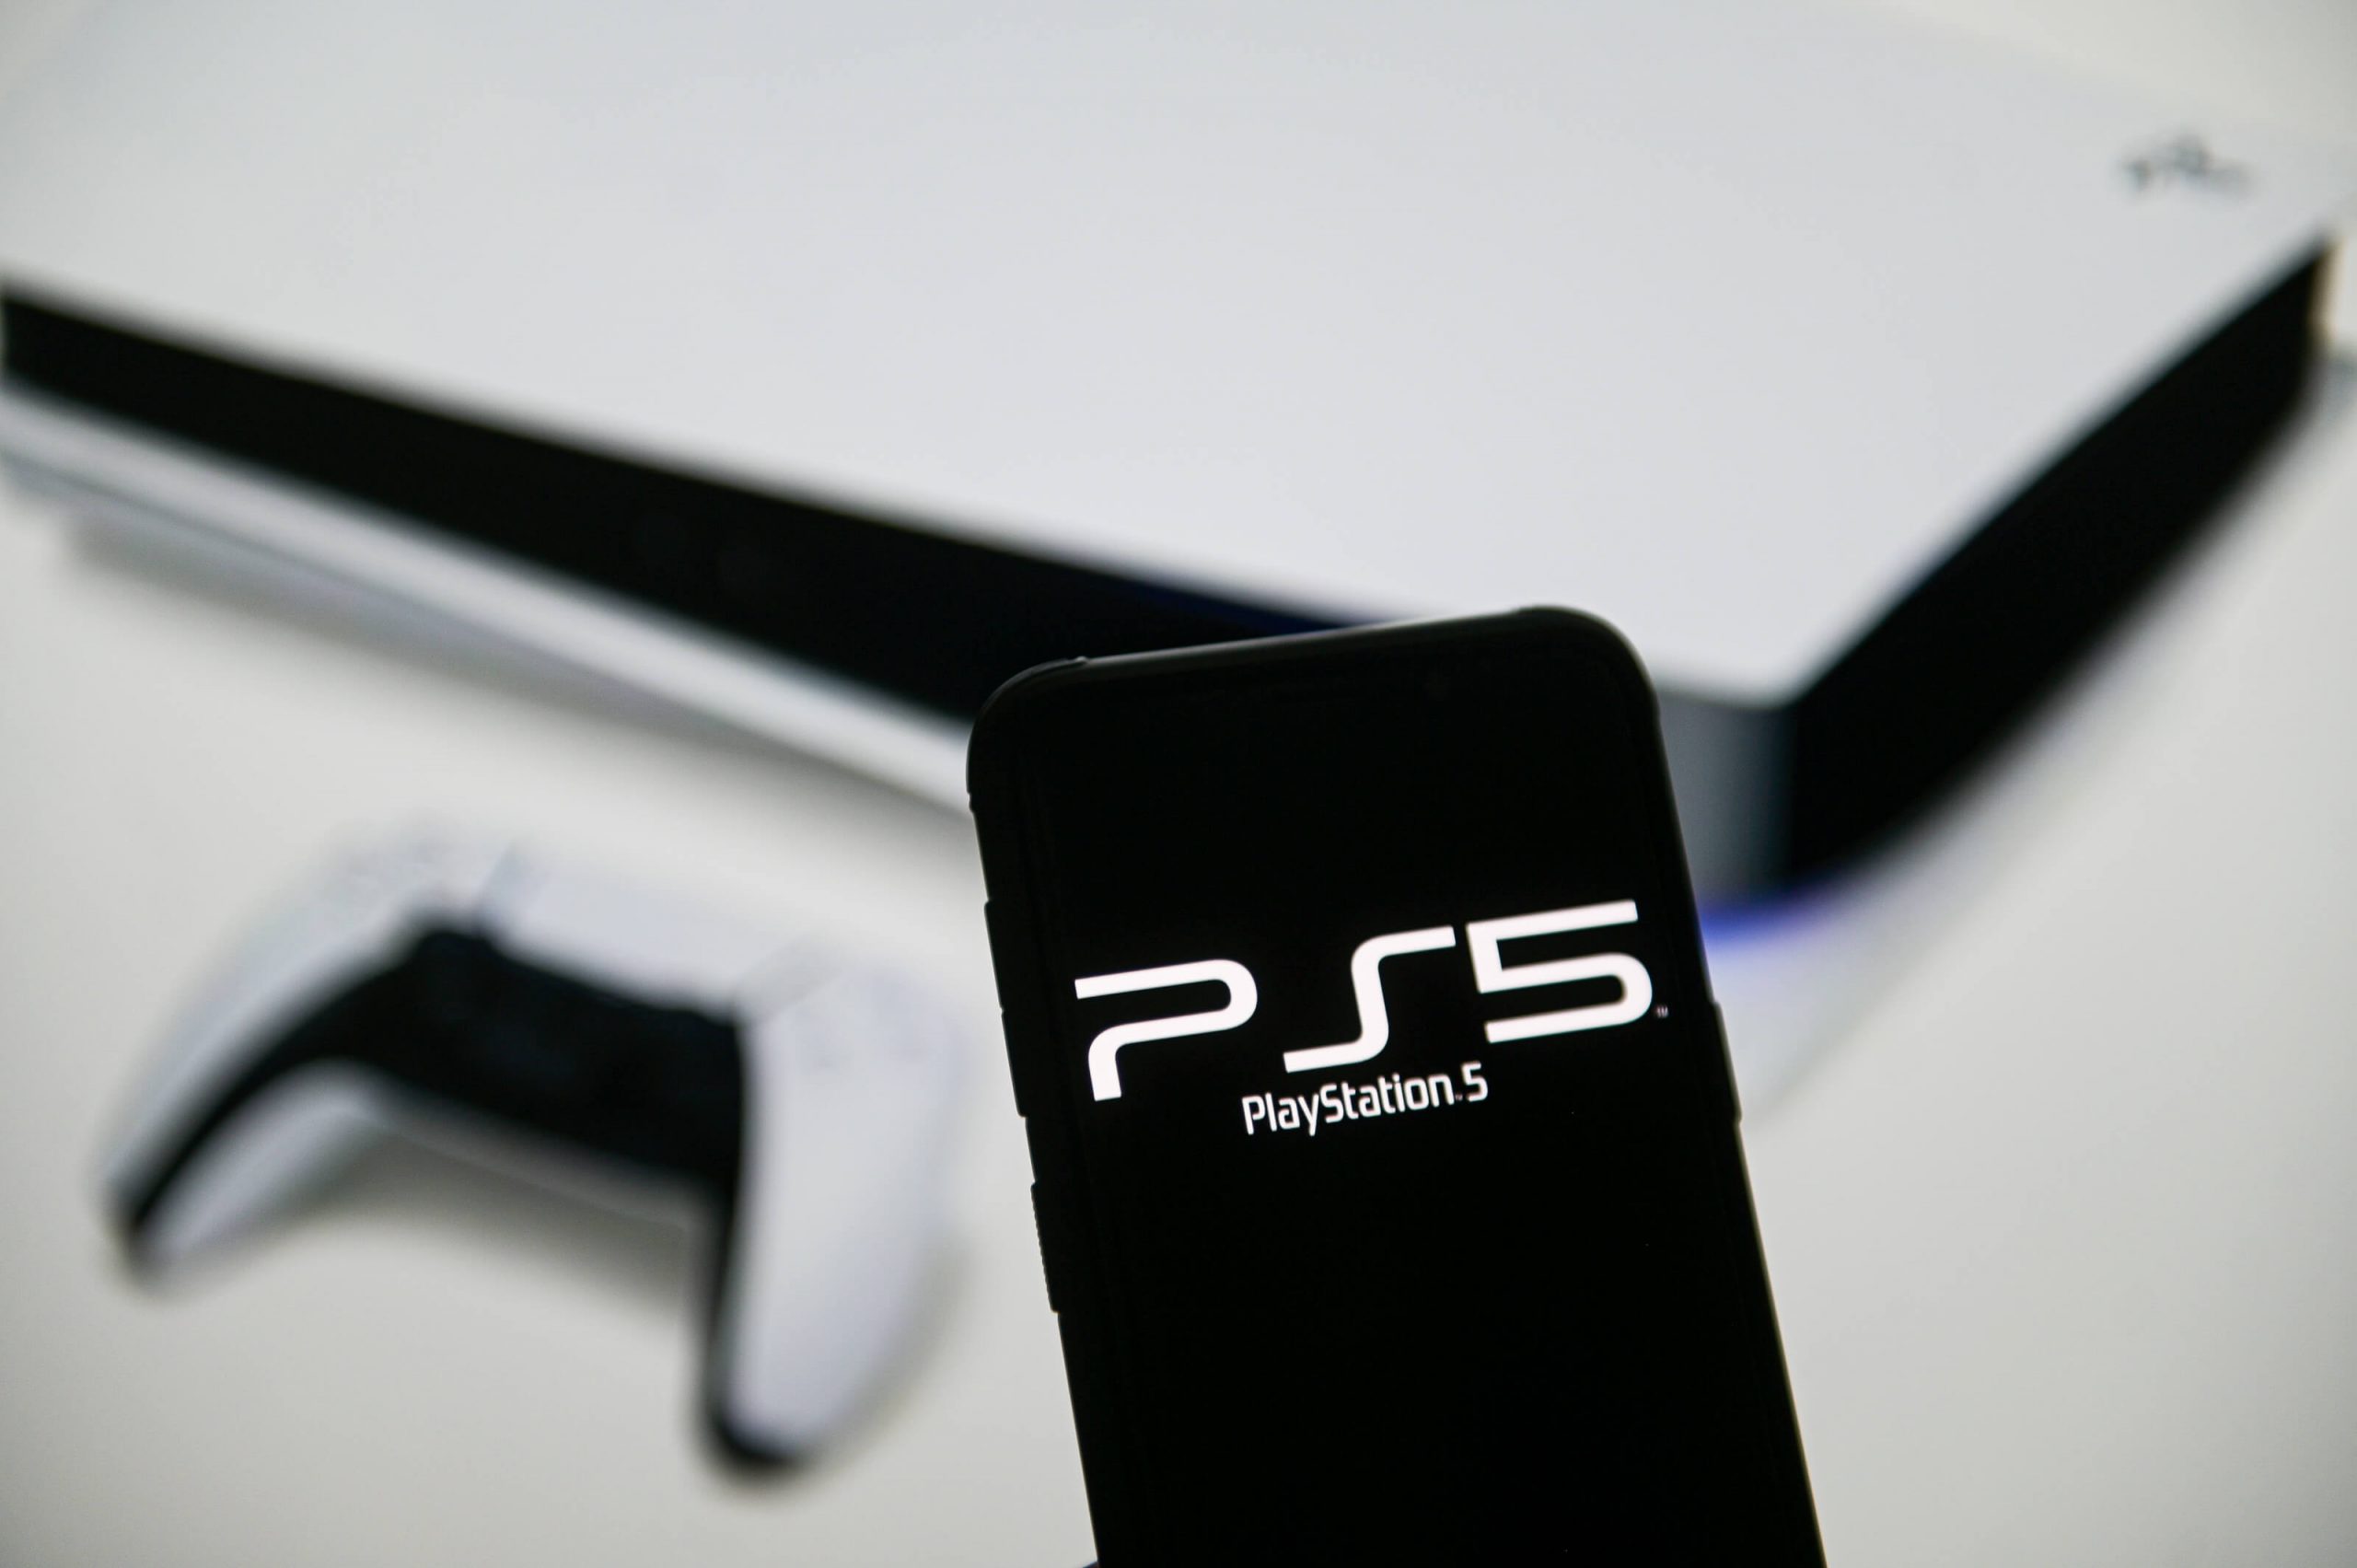 Can you connect an external drive to the PS5?